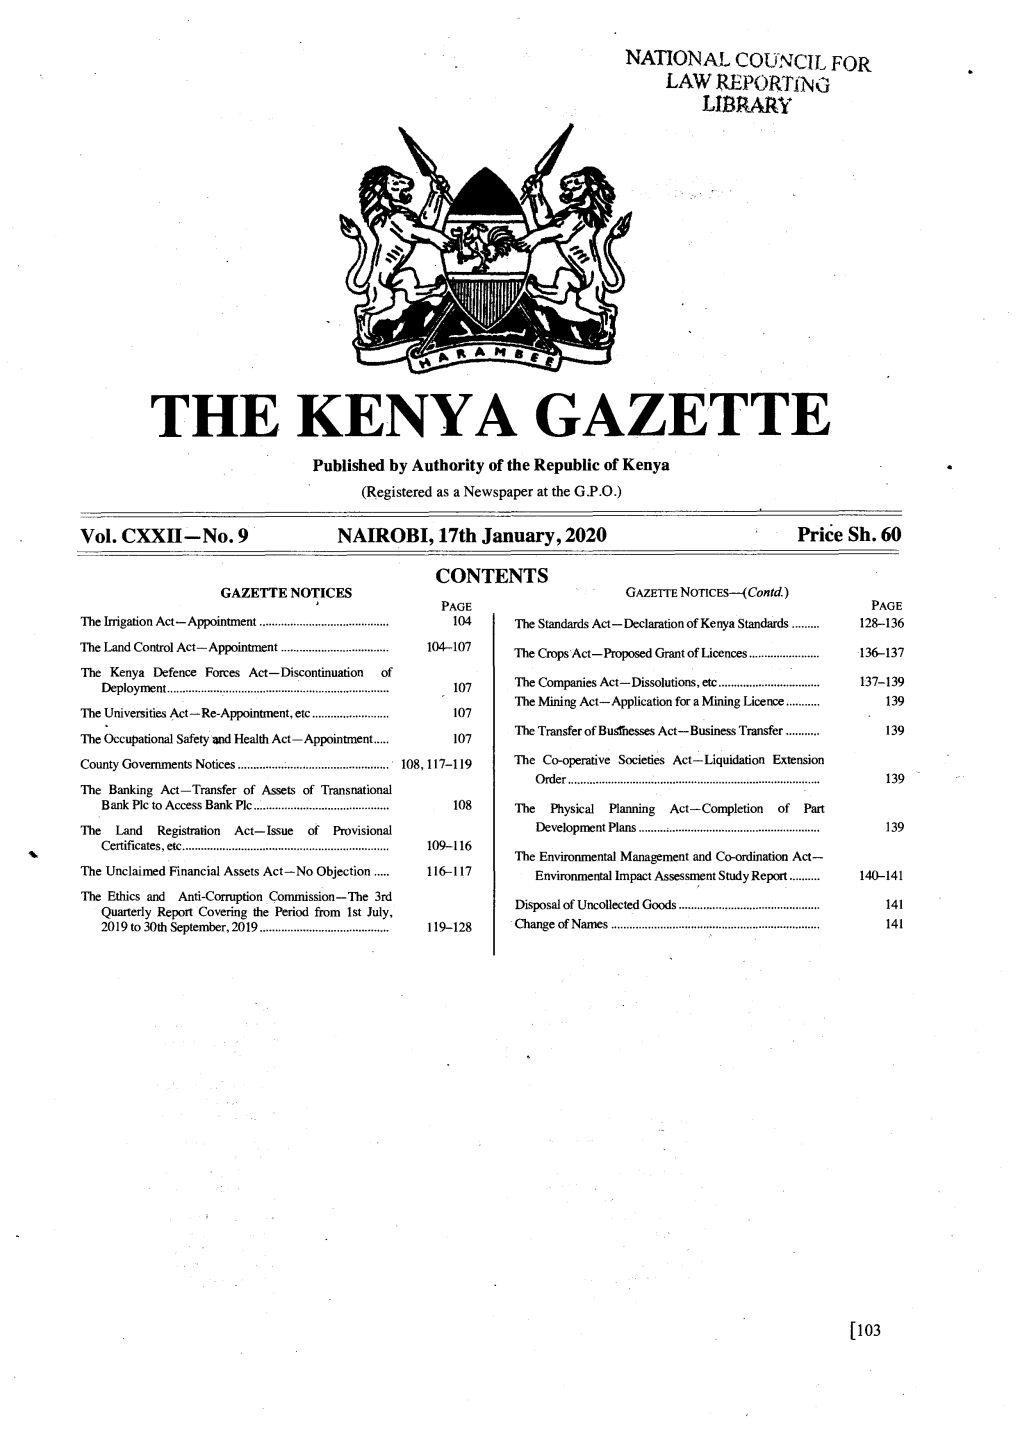 THE KENYA GAZETTE Published by Authority of the Republic of Kenya (Registered As a Newspaper at the G .P.0 .)